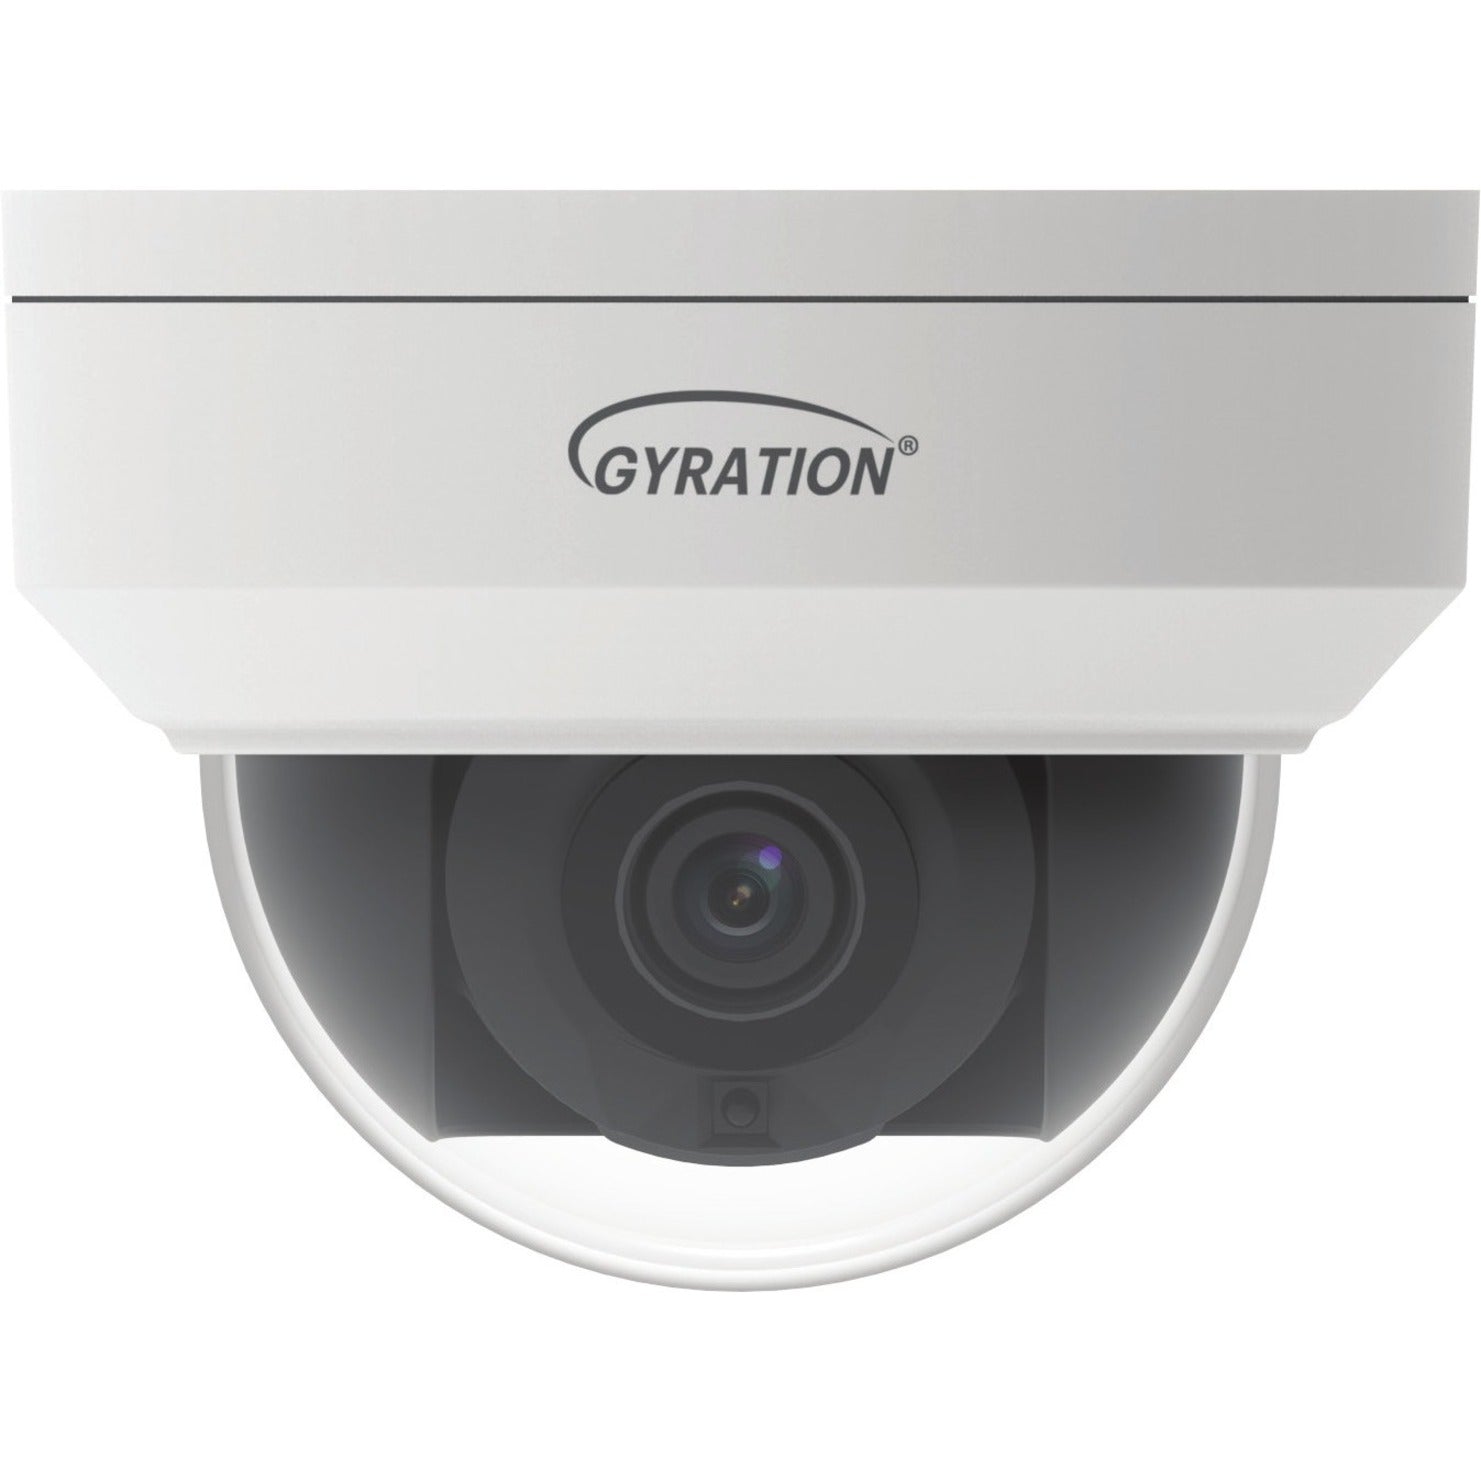 Gyration CYBERVIEW 200D 2 MP Outdoor IR Fixed Dome Camera, Full HD, Wide Dynamic Range, Motion Detection